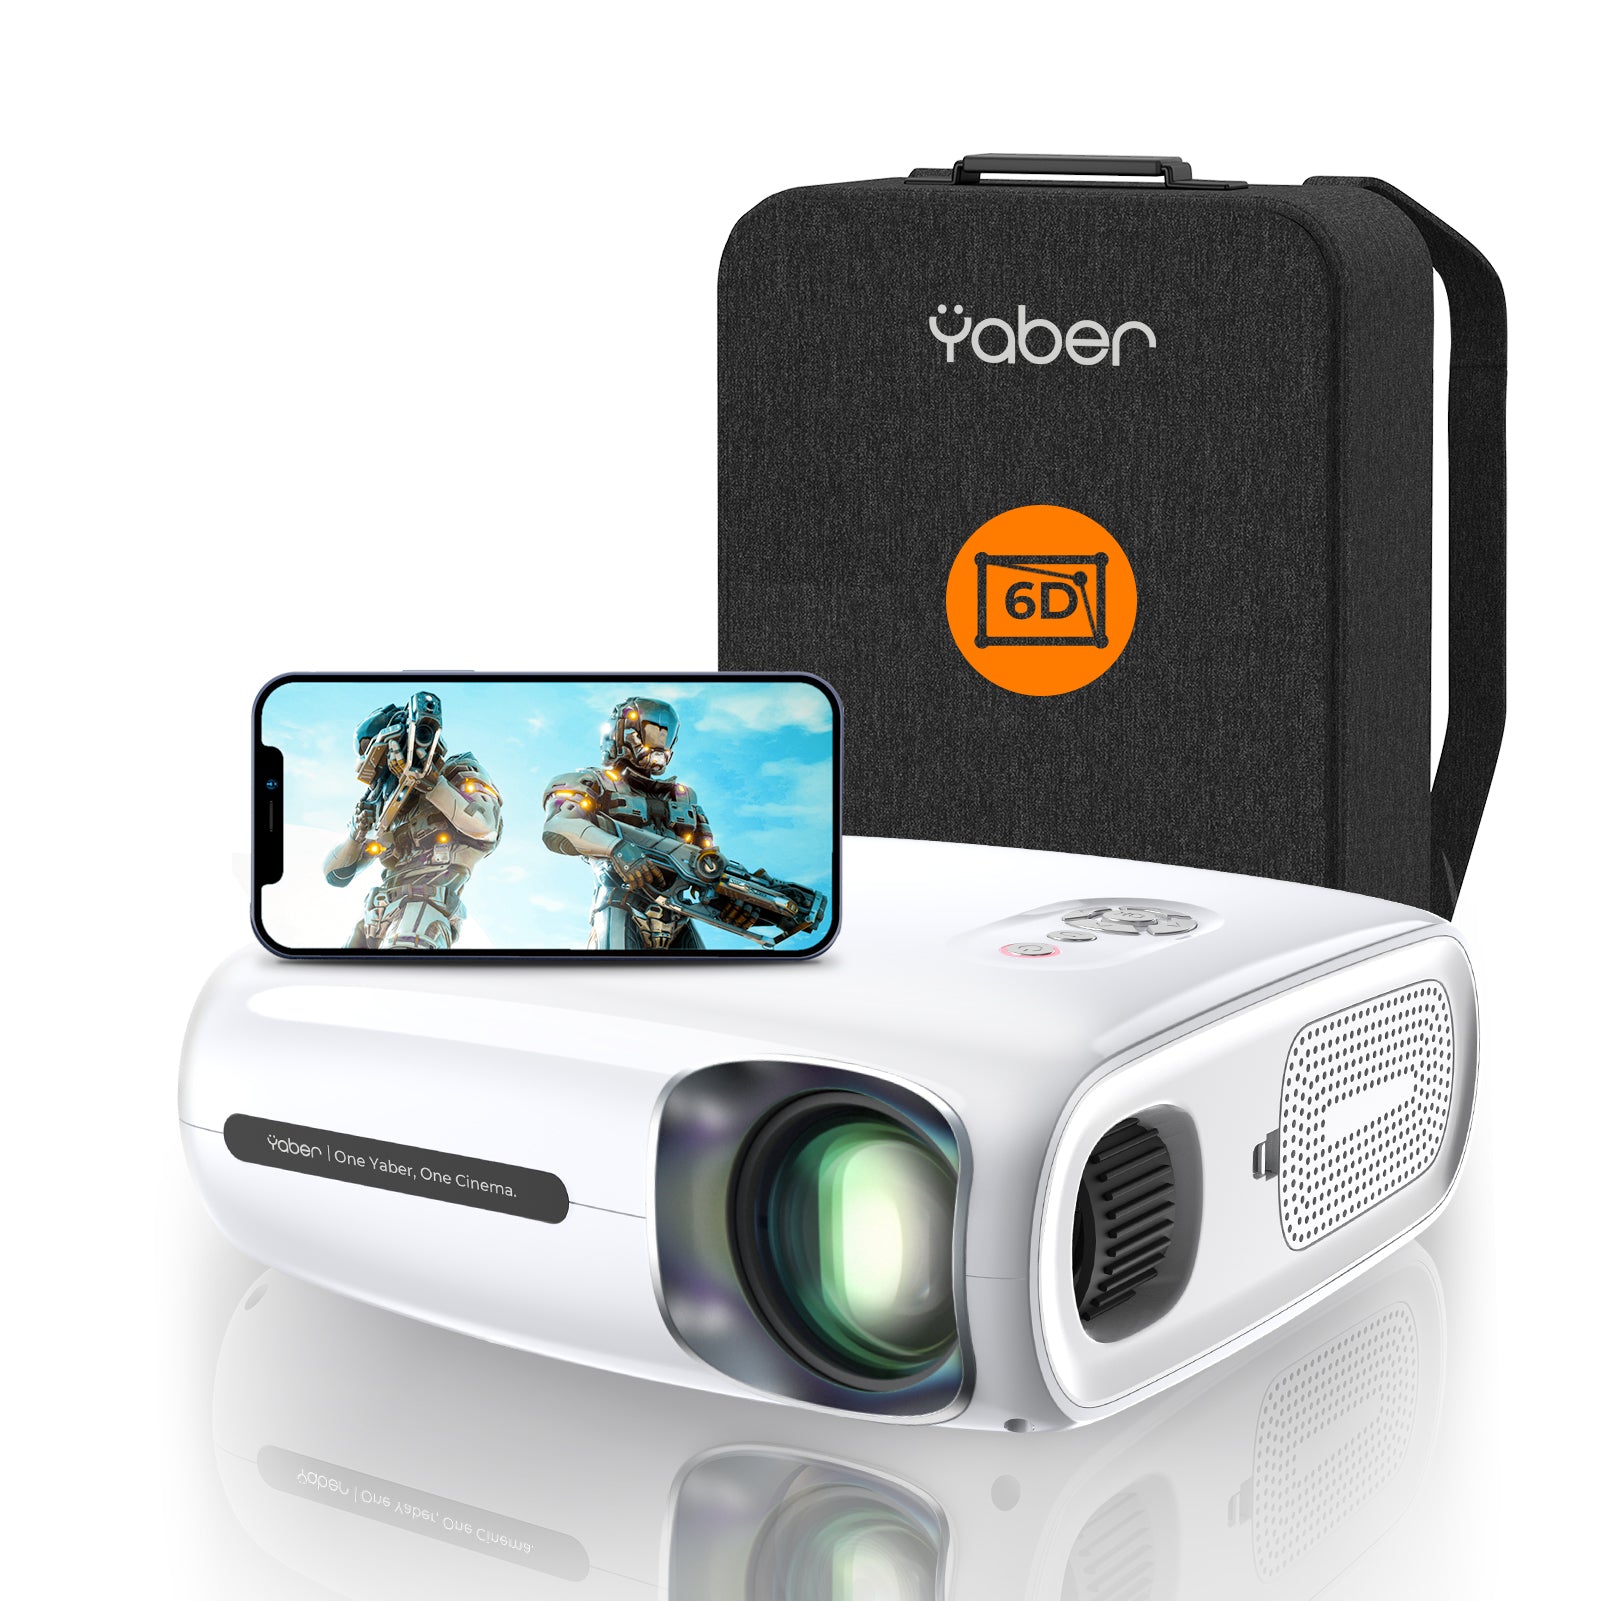 Yaber Projector Pro V7 - YABER Home Projector, Entertainment Projector